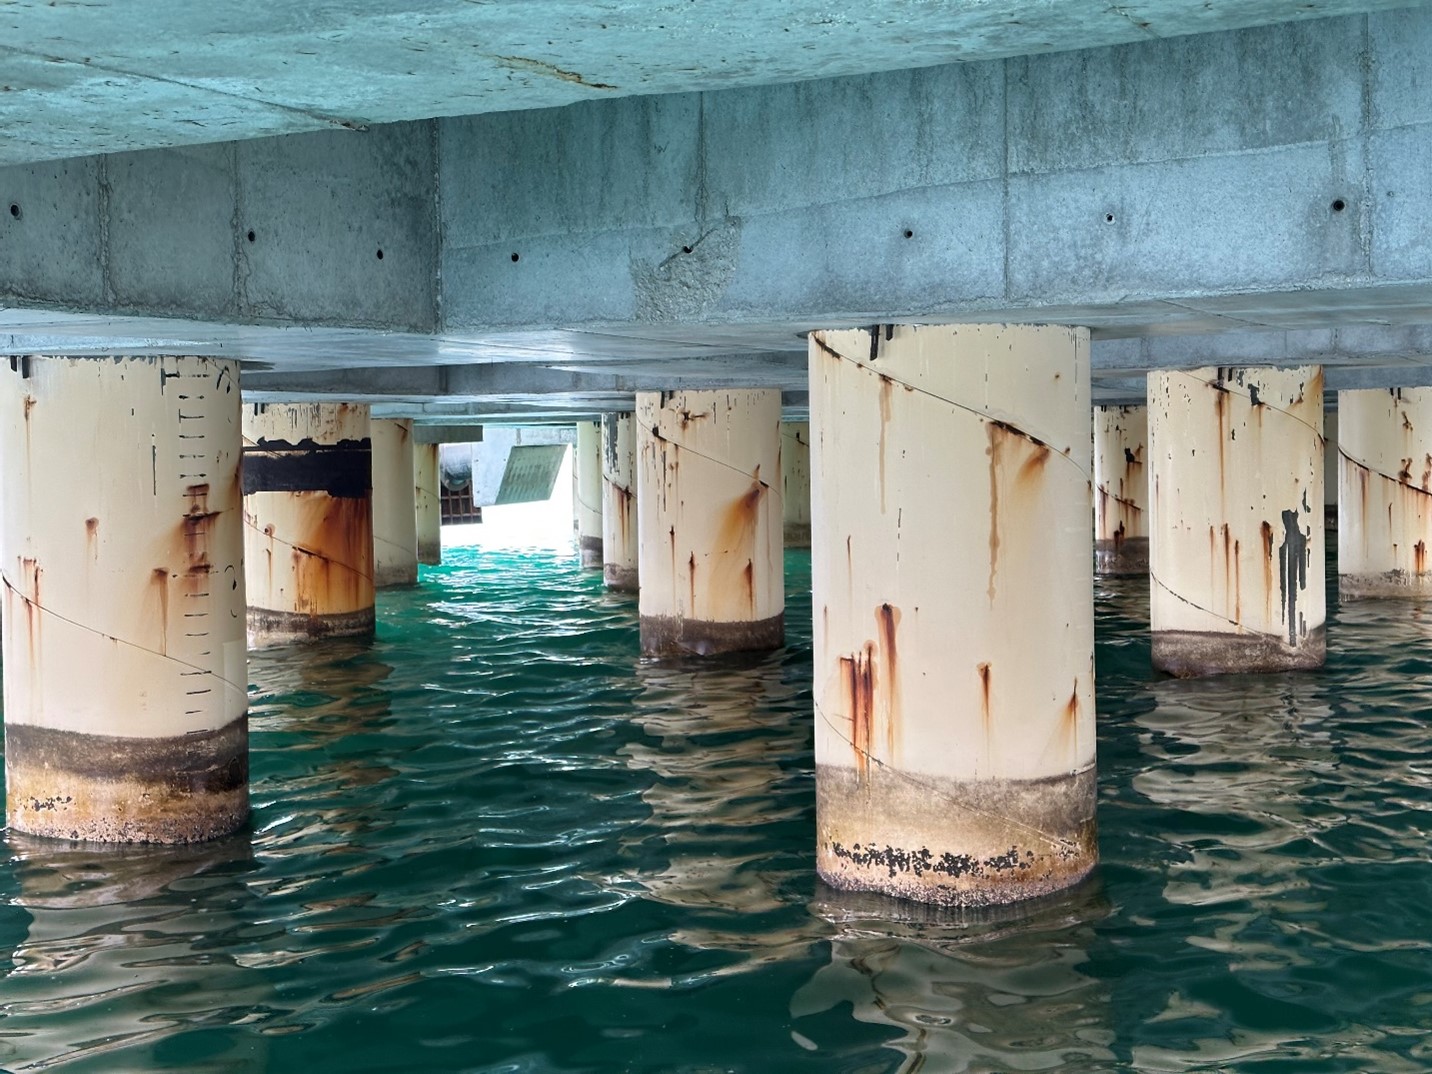 No observed damage for wharf structure supported on 4-foot diameter concrete fill steel pipe piles spaced at approximately 12 feet on centers, Ceyhan, Adana